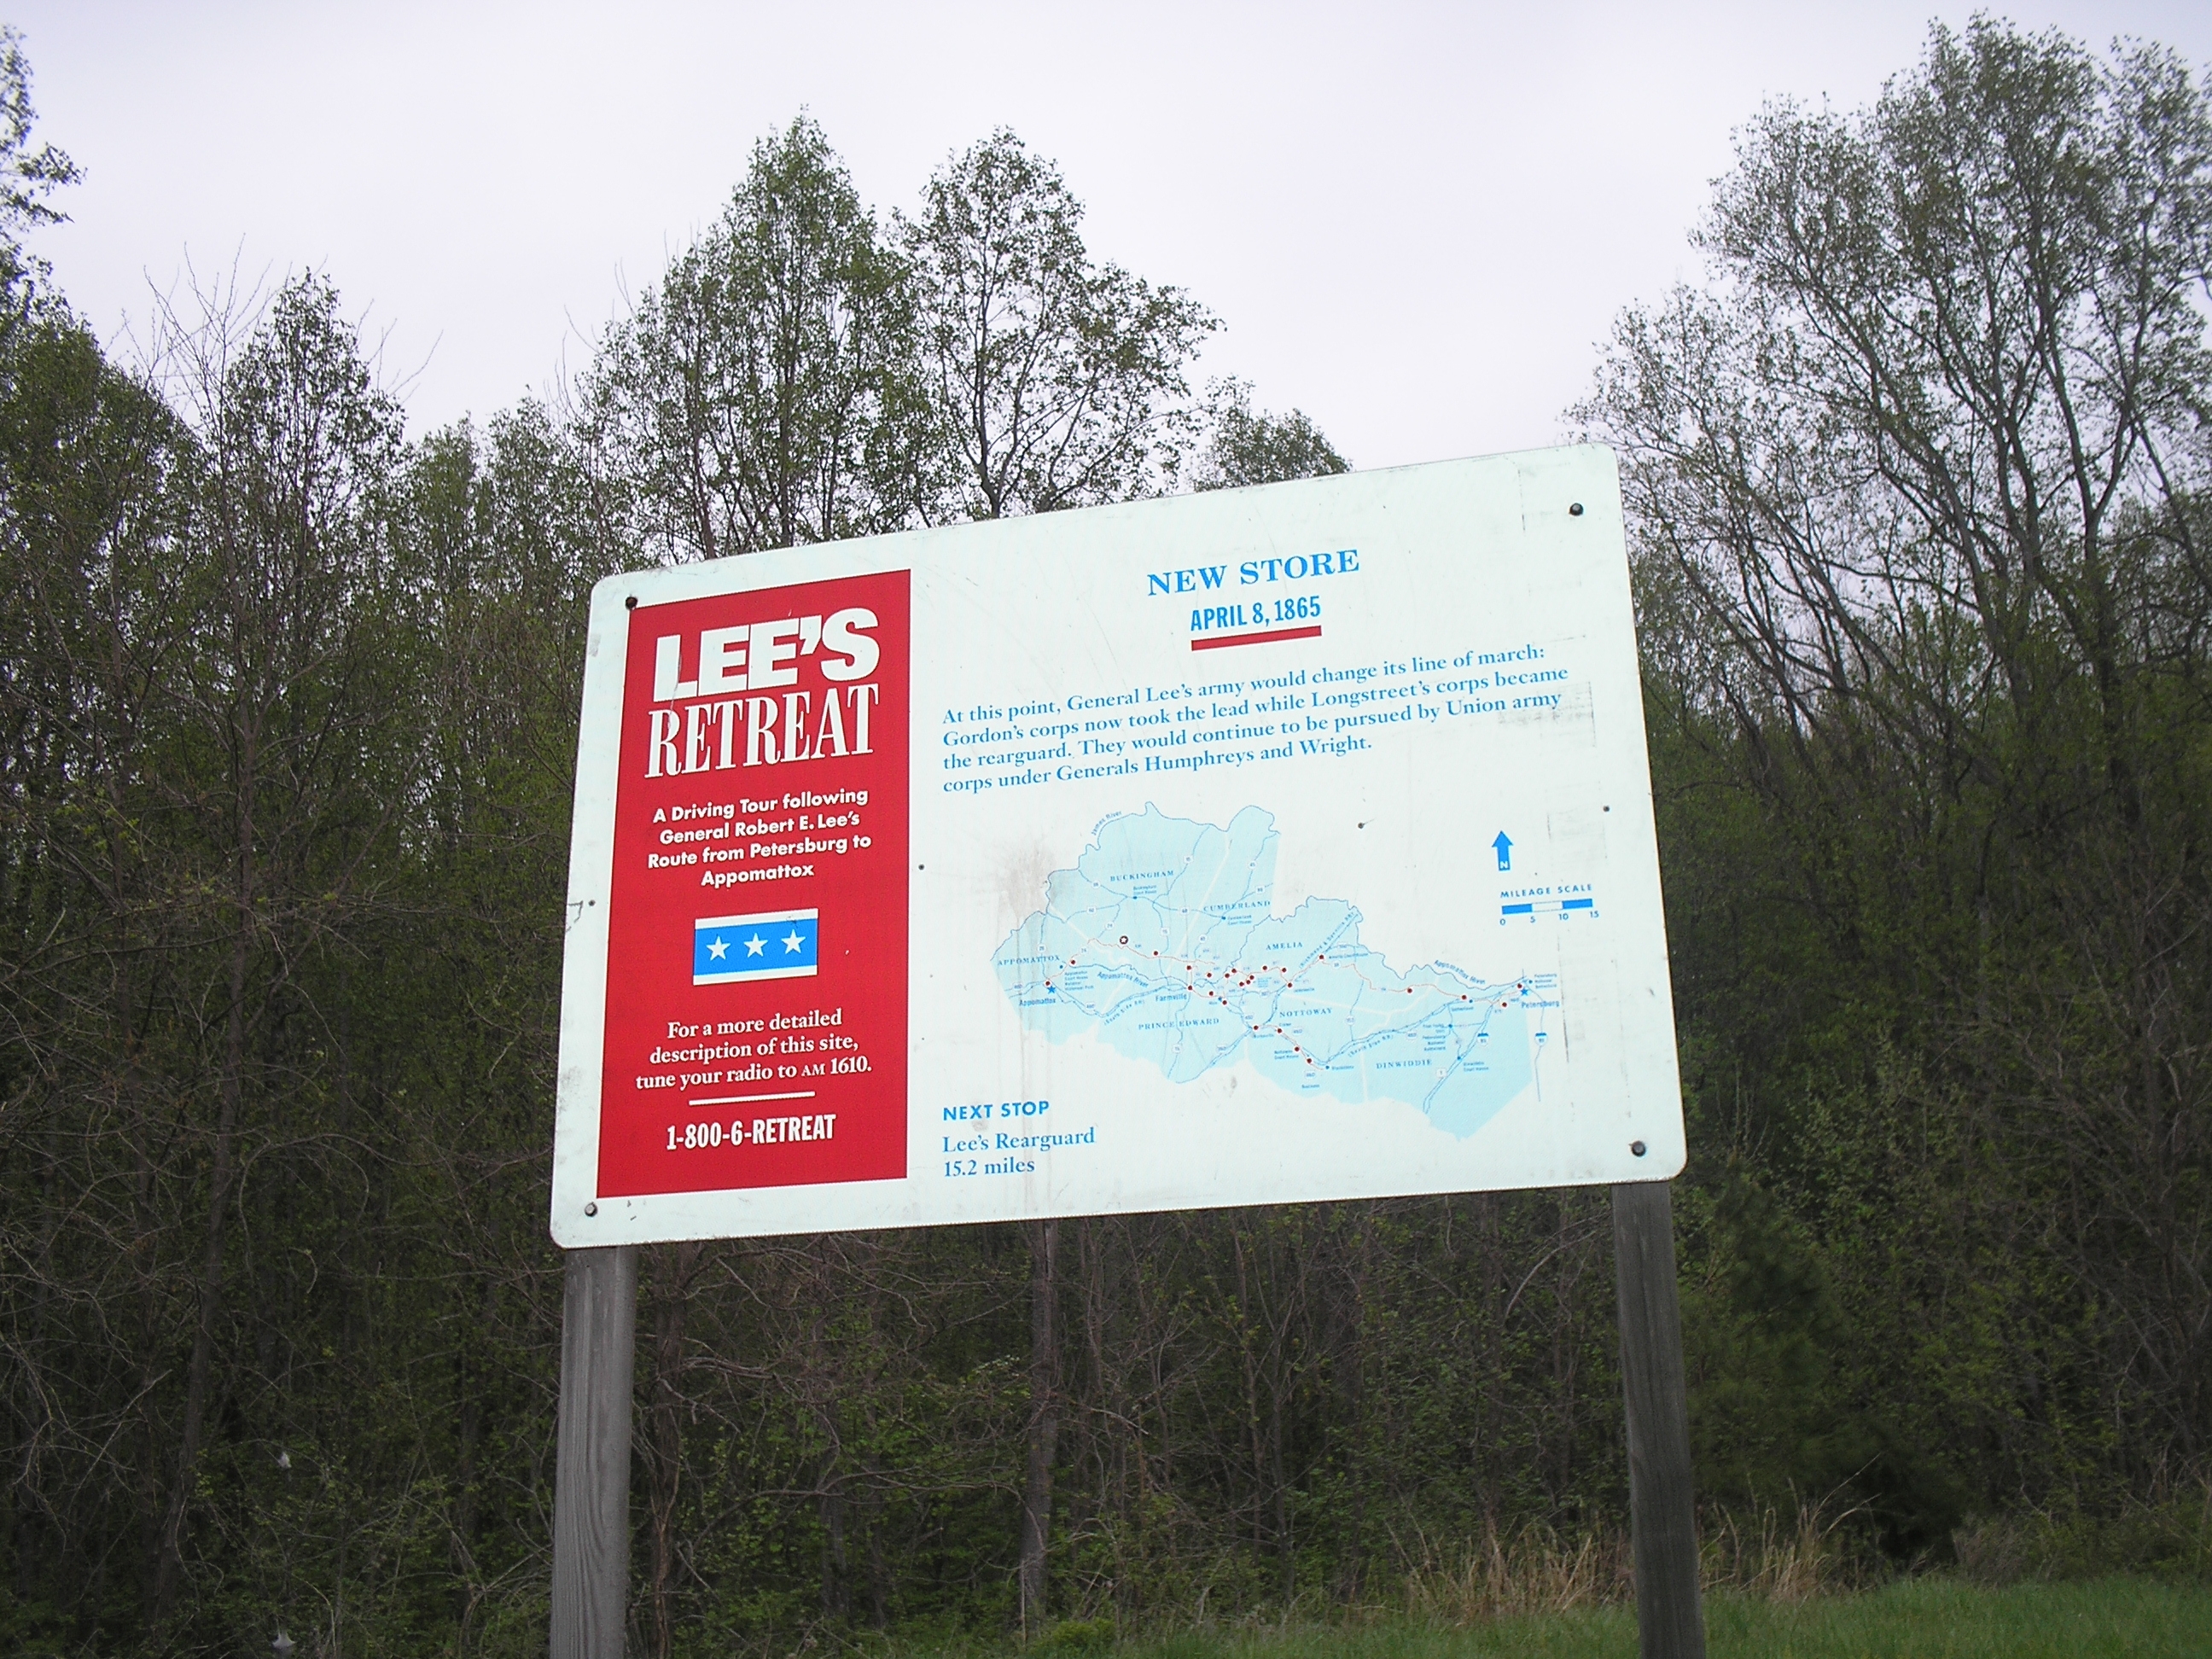 New Store Marker on Lee’s Retreat